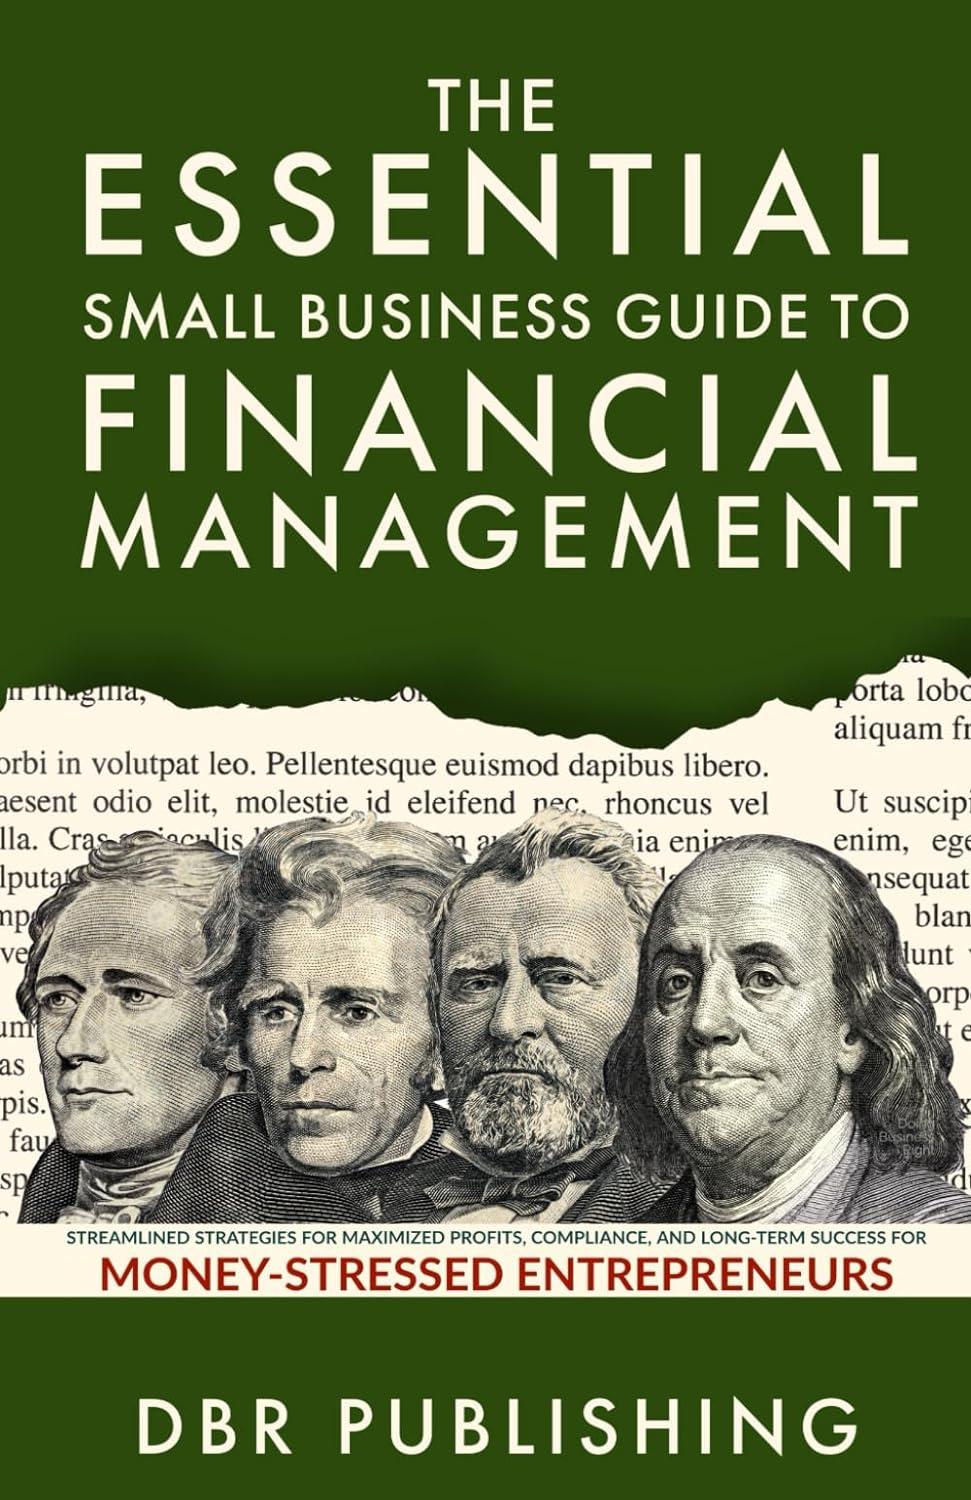 the essential small business guide to financial management 1st edition dbr publishing b0cjddg79s,